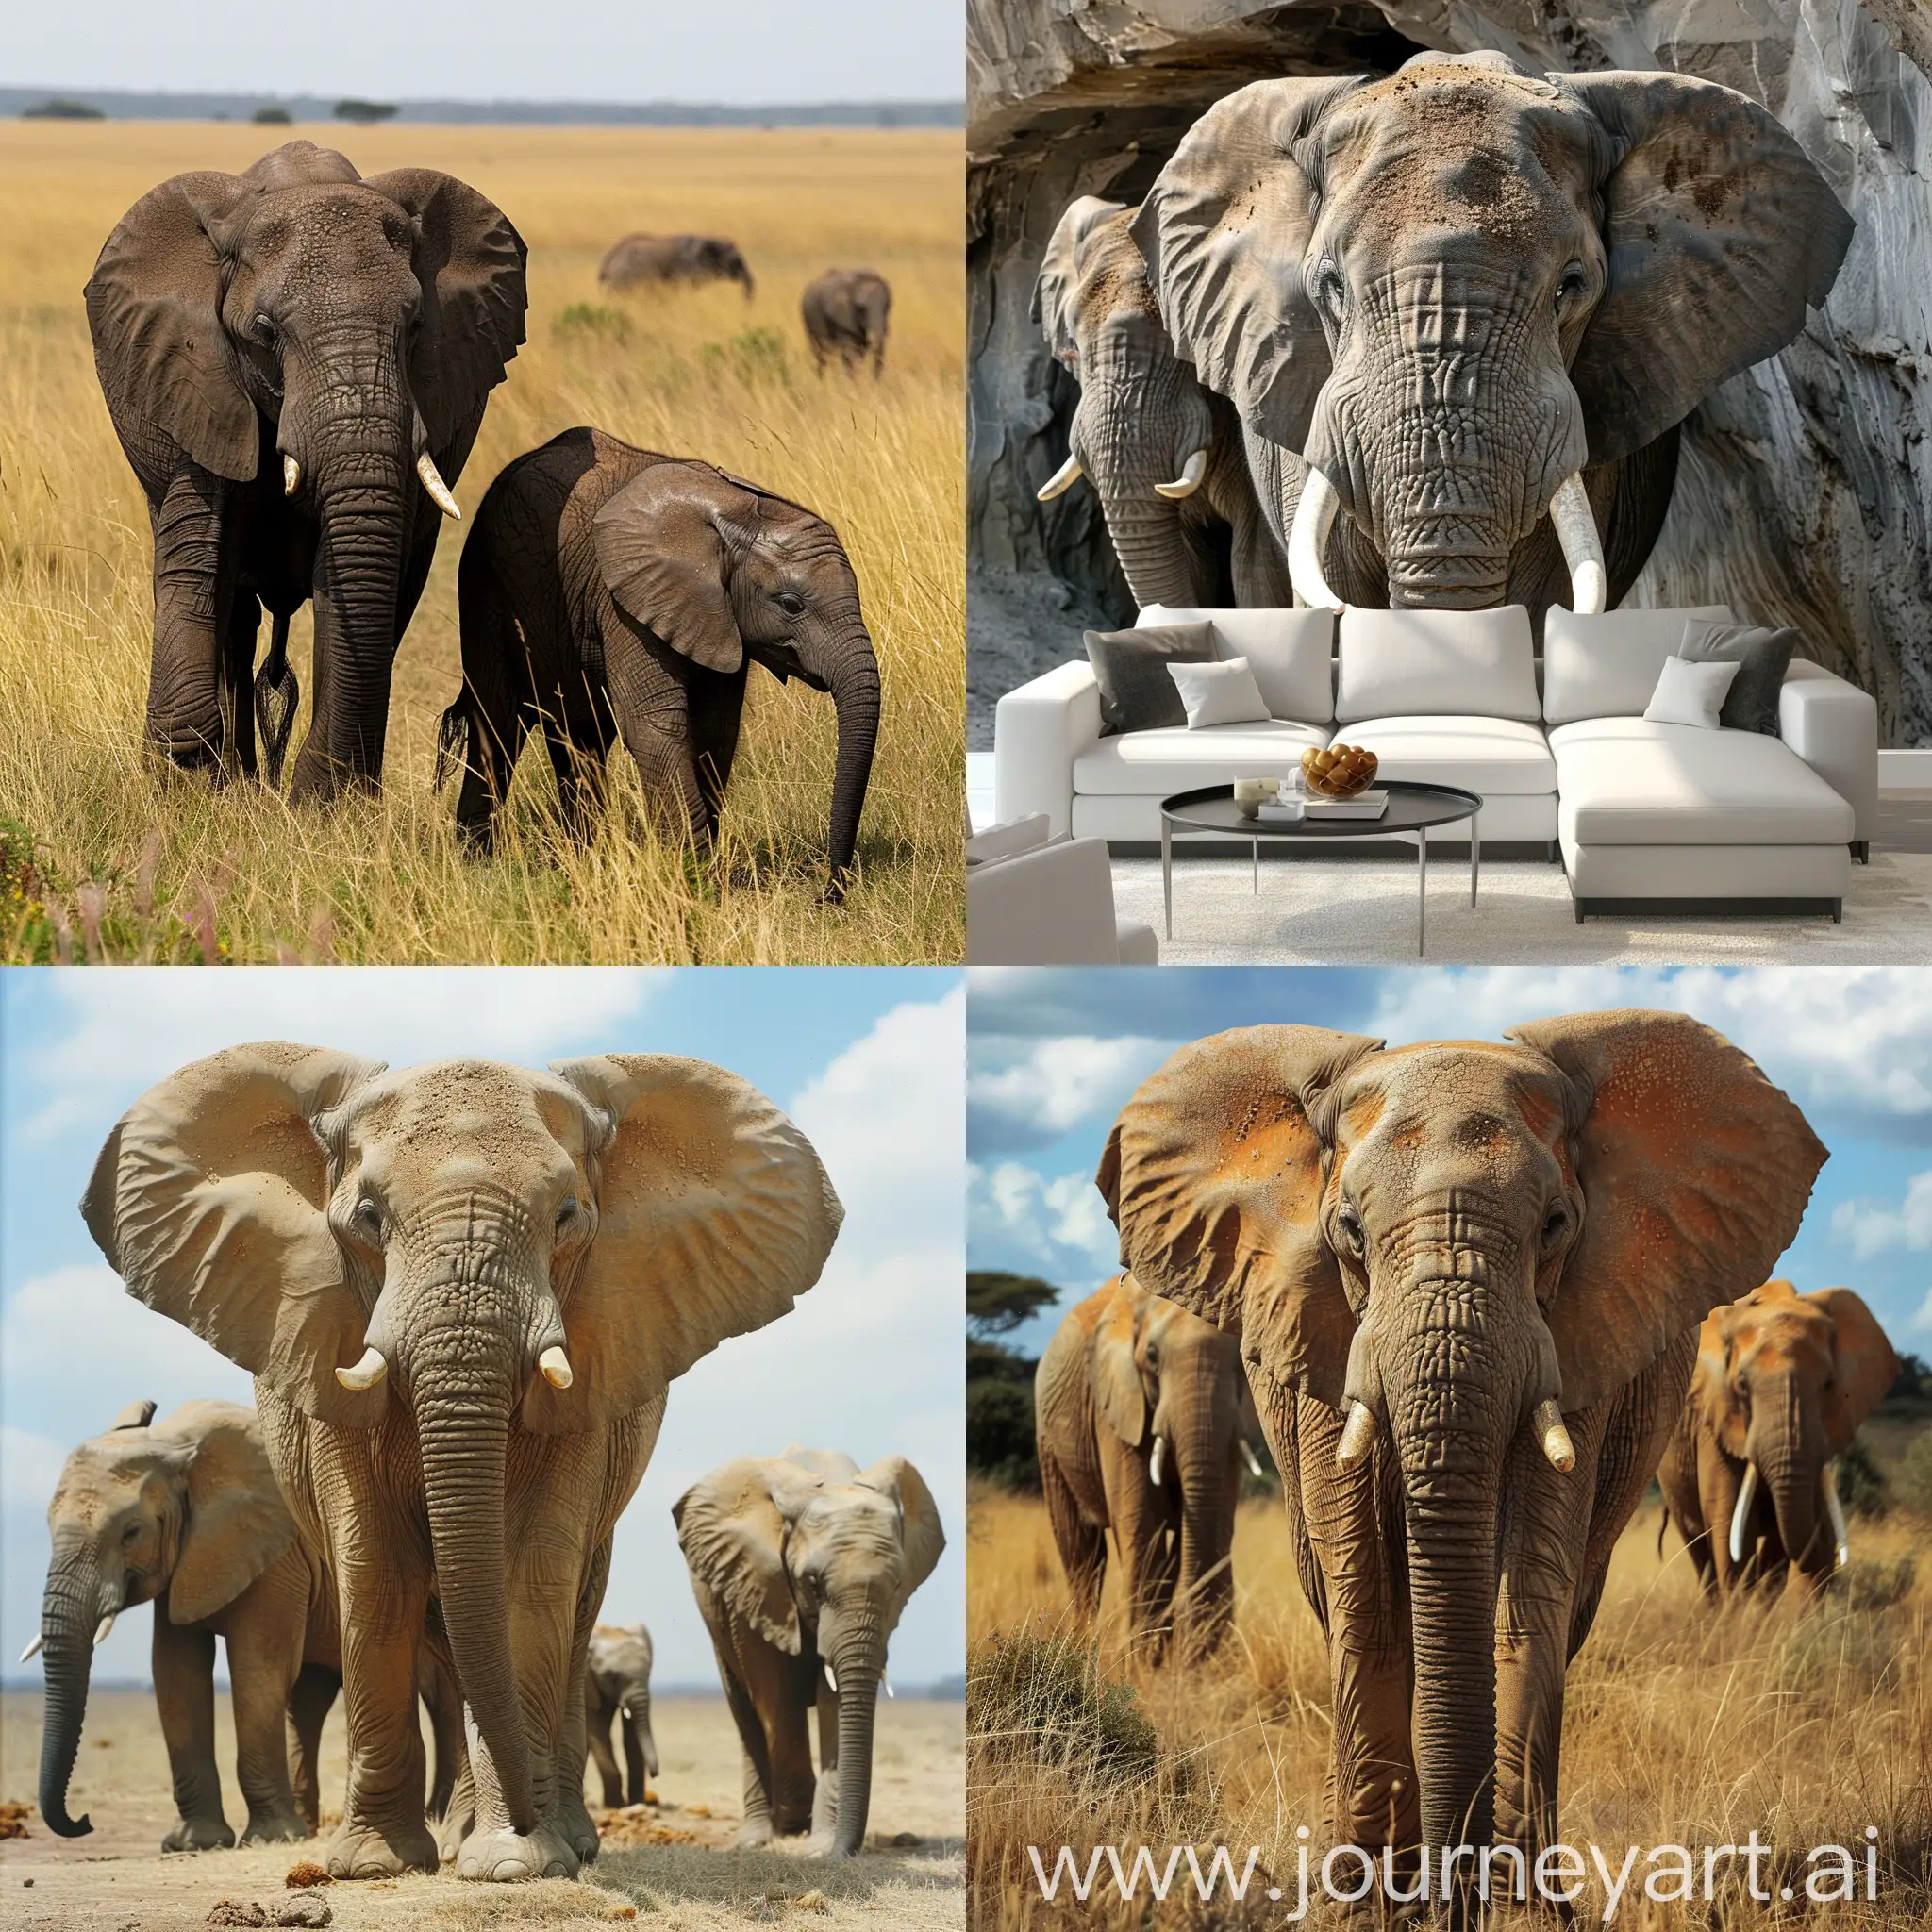 Majestic elephants: embody strength, wisdom, unique beauty. Gentle giants, symbols of resilience, intelligence, and grace in the natural world.